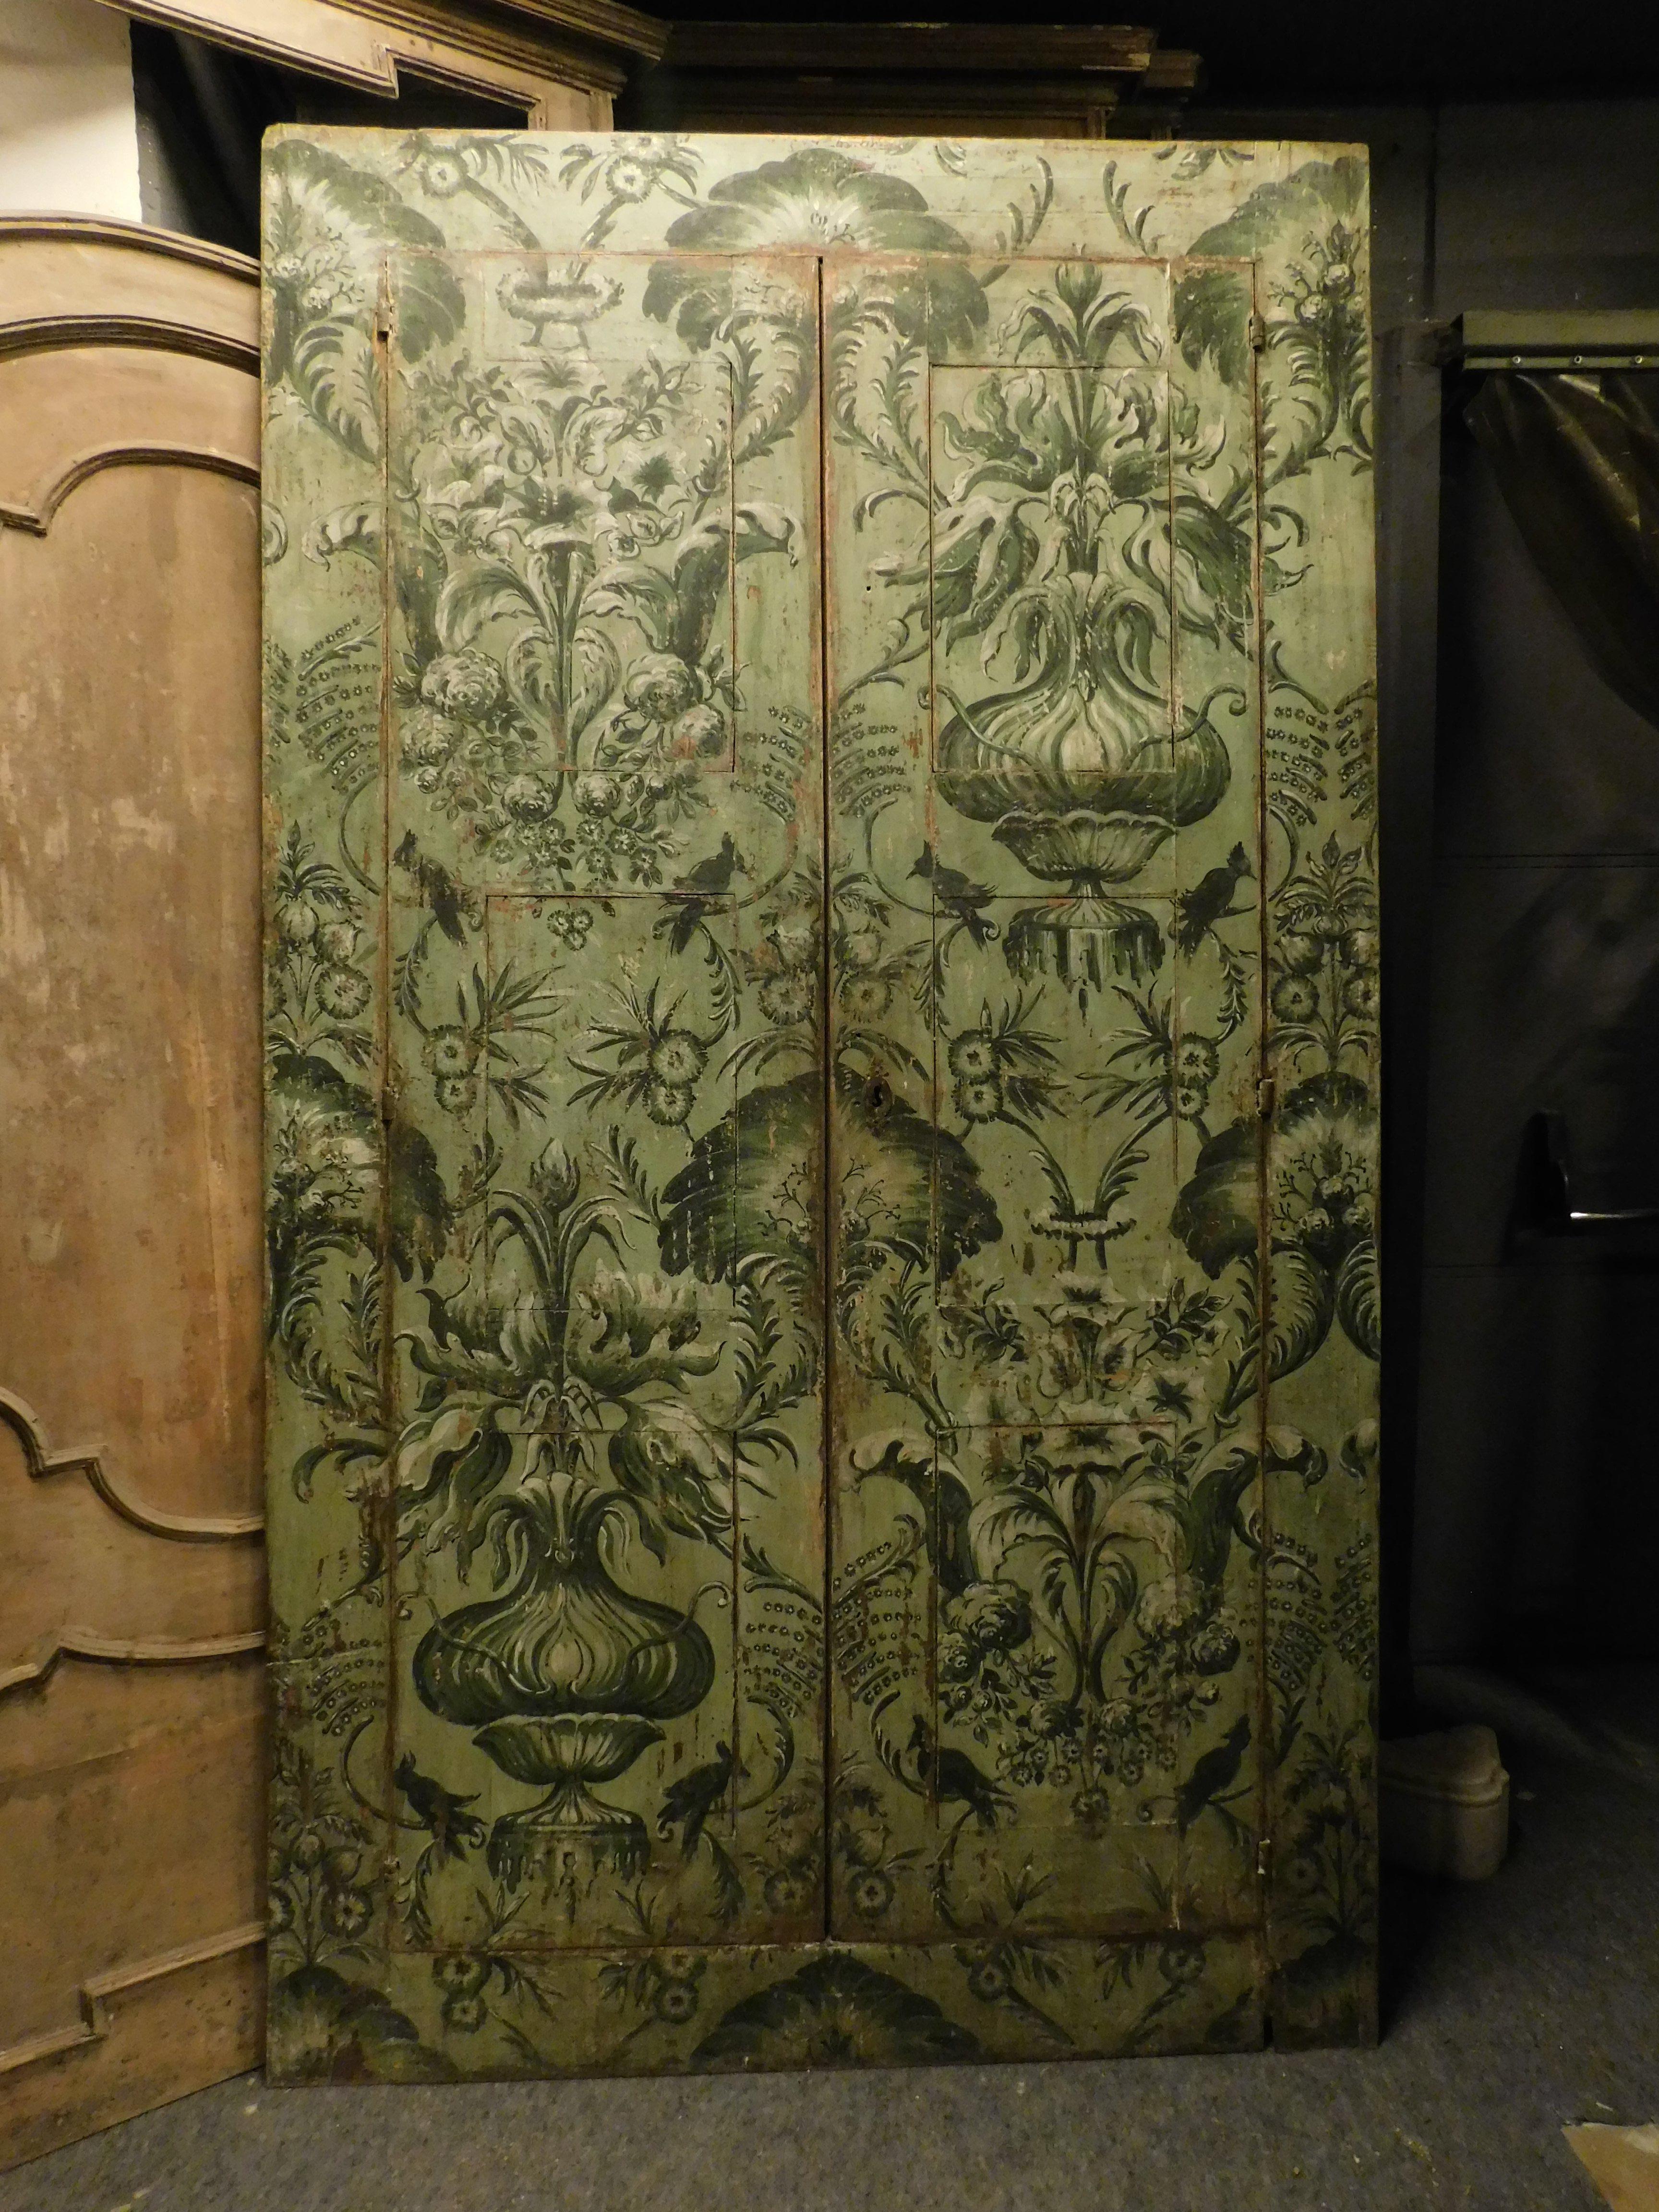 Antique Placard, vintage built-in wardrobe, richly hand-painted on a green background with jungle-like floral motifs, created for the built-in wardrobe of an ancient house in Florence, it was created to resume and continue the upholstery of the